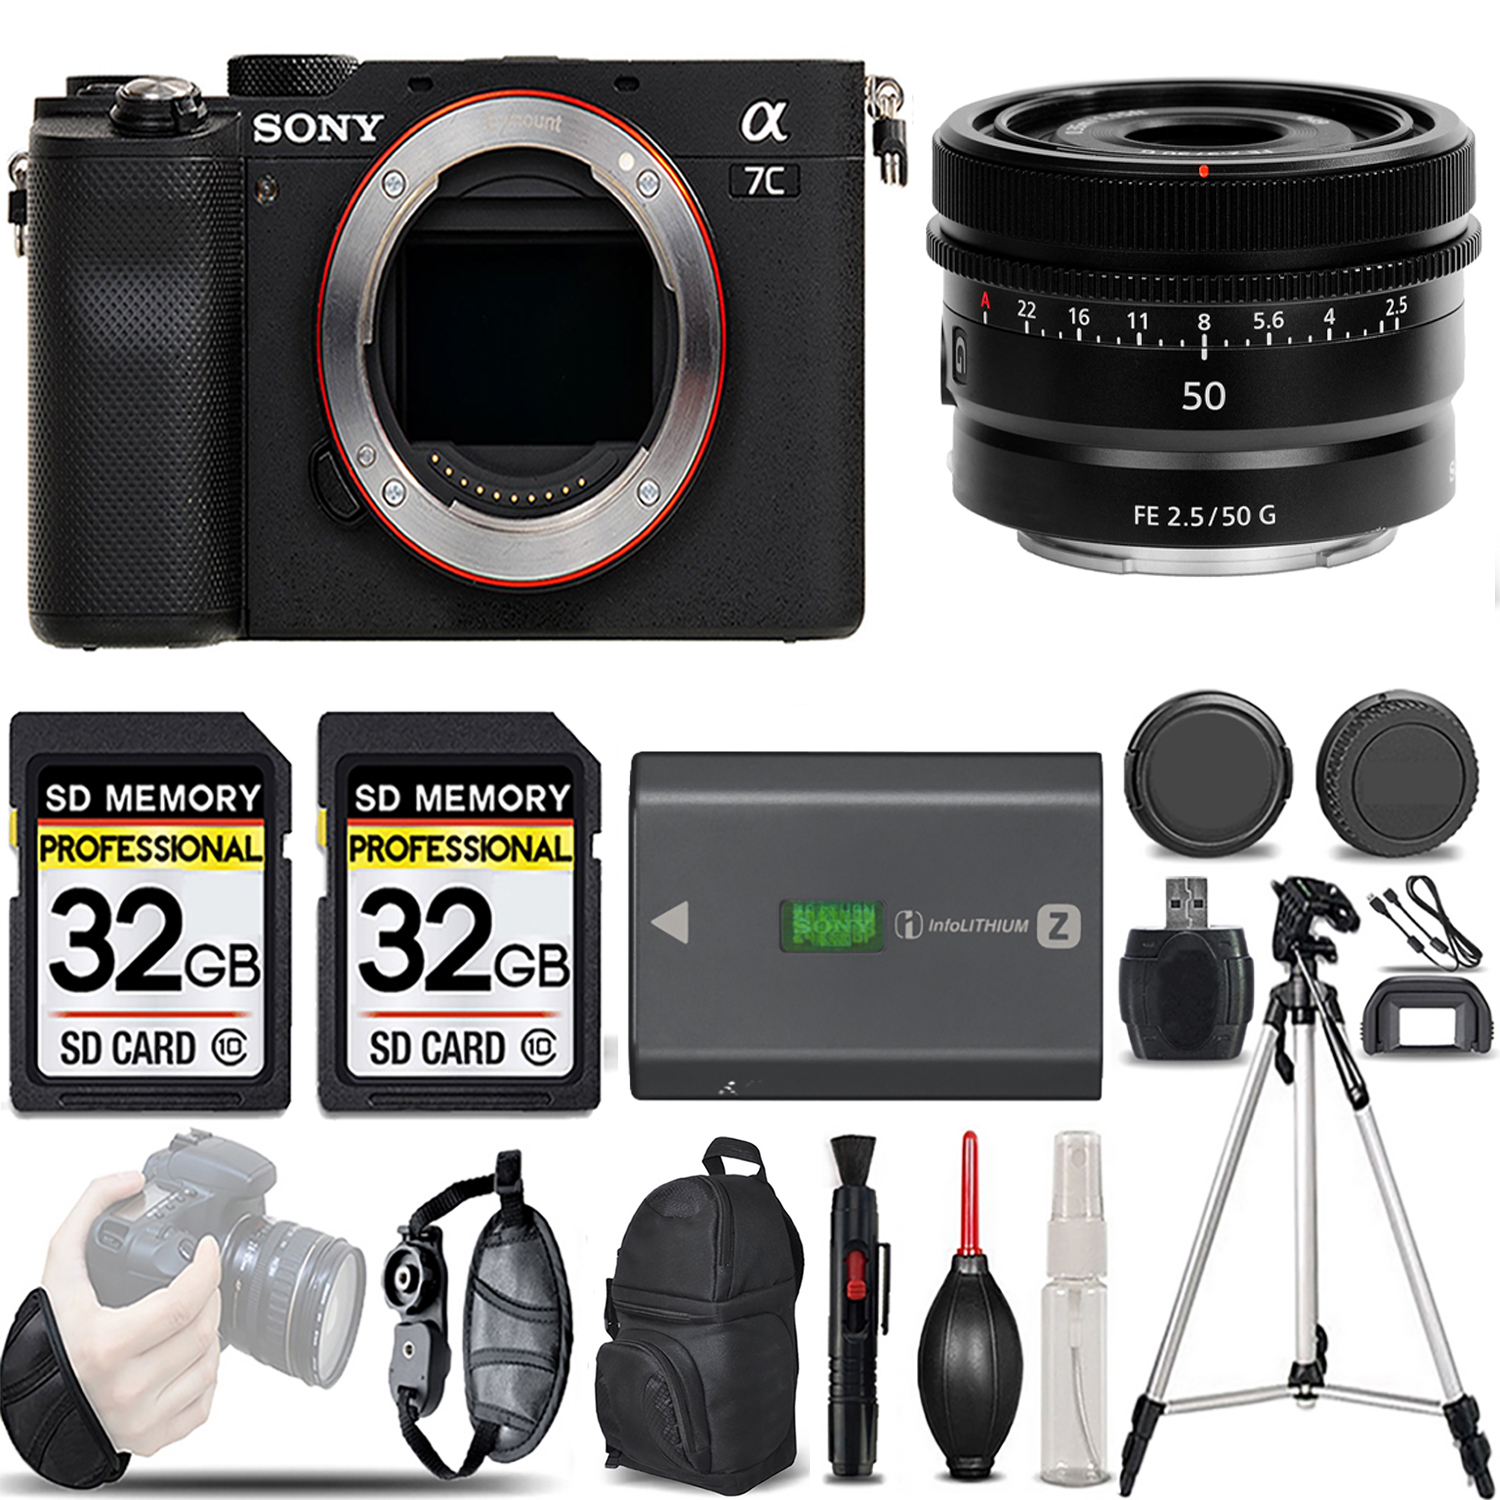 Alpha a7C Camera (Silver) + 50mm Lens + Bag + Extra Battery + 64GB Kit *FREE SHIPPING*